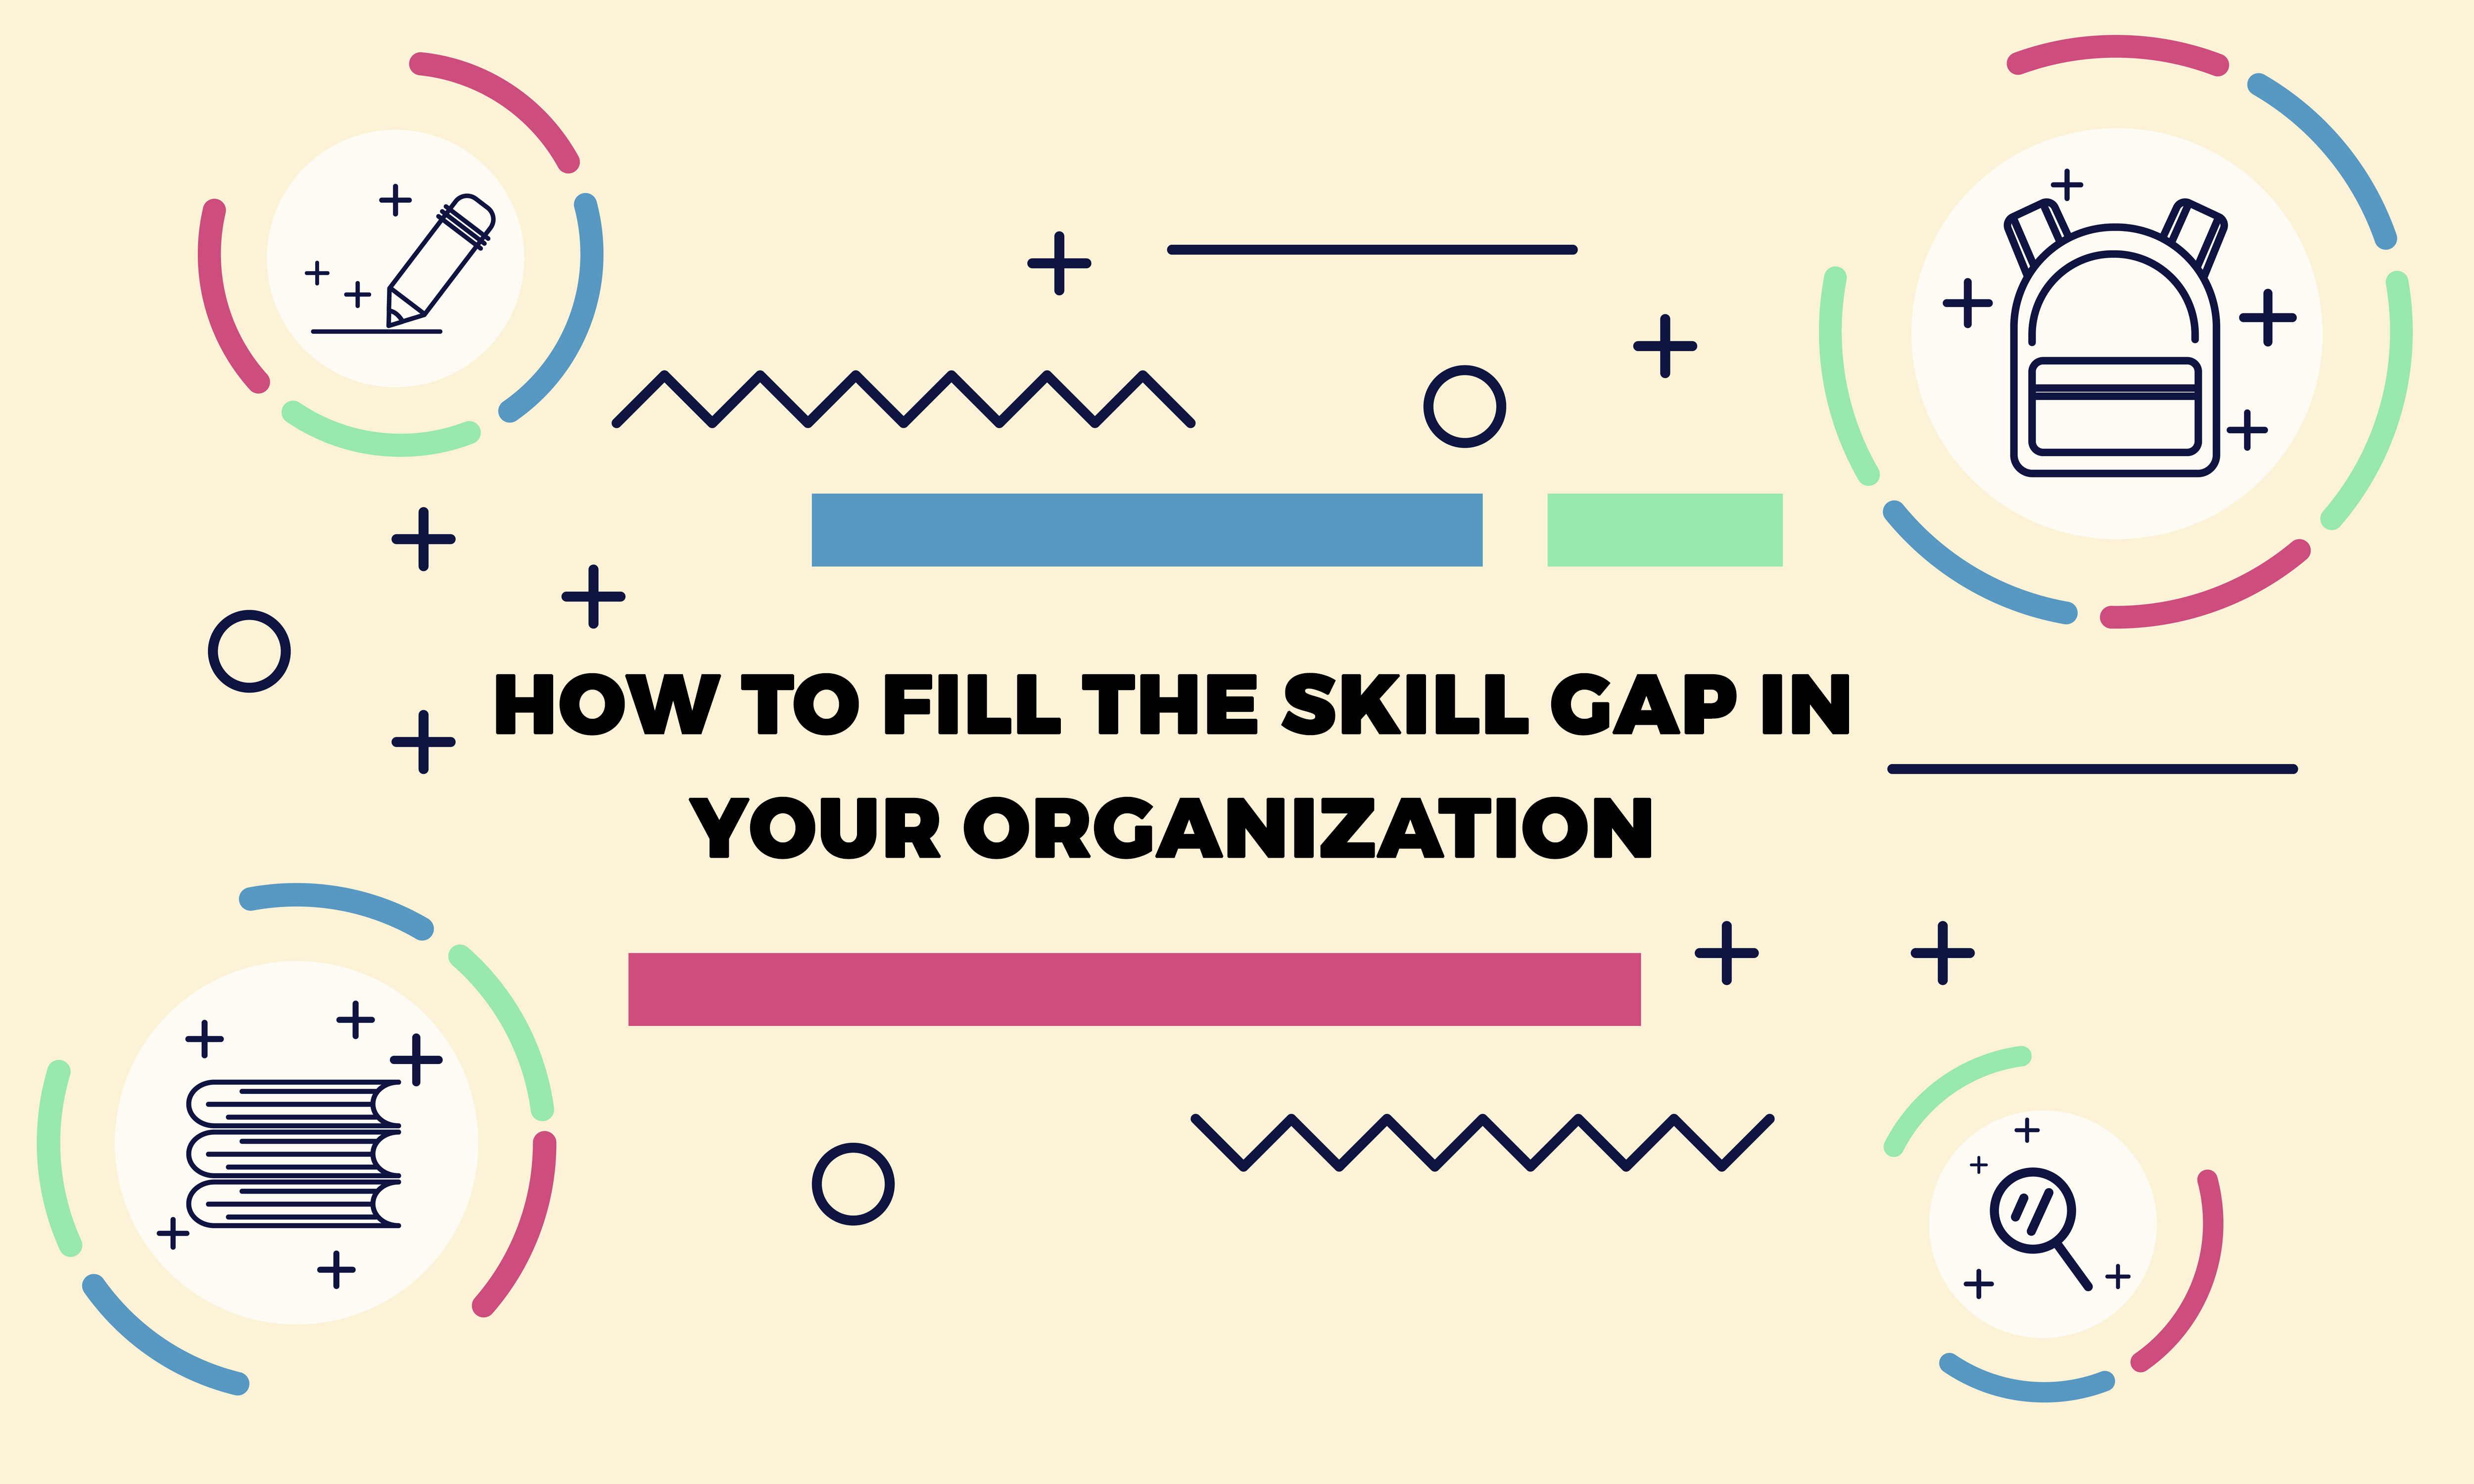 How to fill the skill gap in your organization